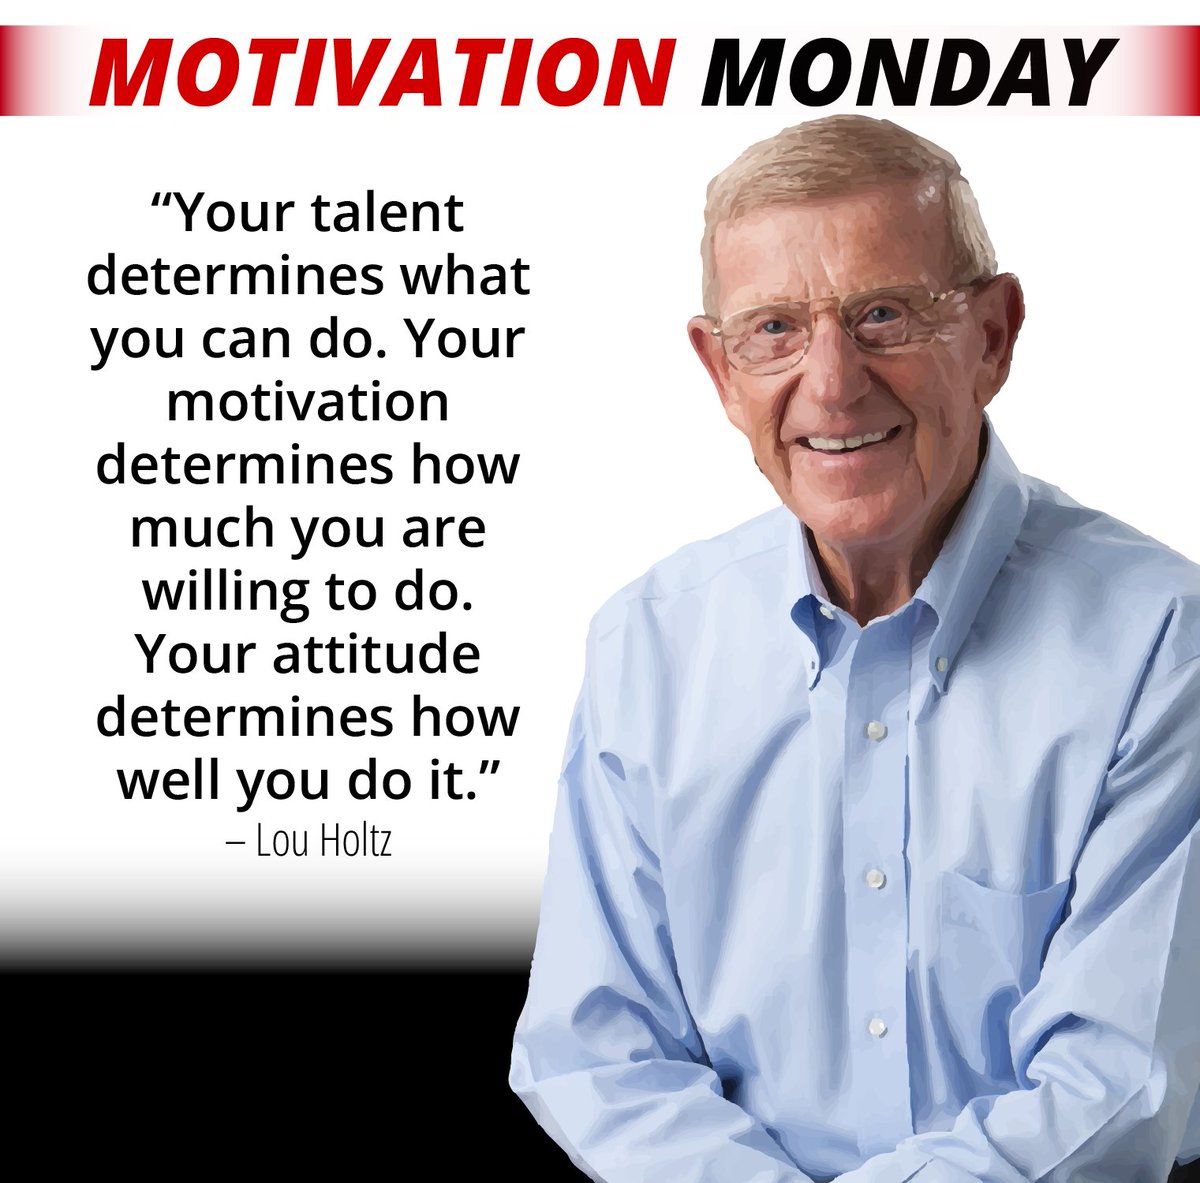 Talent, motivation and attitude are the ingredients to having a successful start to the day, week, month or year! Keep yourself motivated to be the person you strive to be.

#masterdrive #mindsetmonday #roadsafety #motivation #ArriveAlive